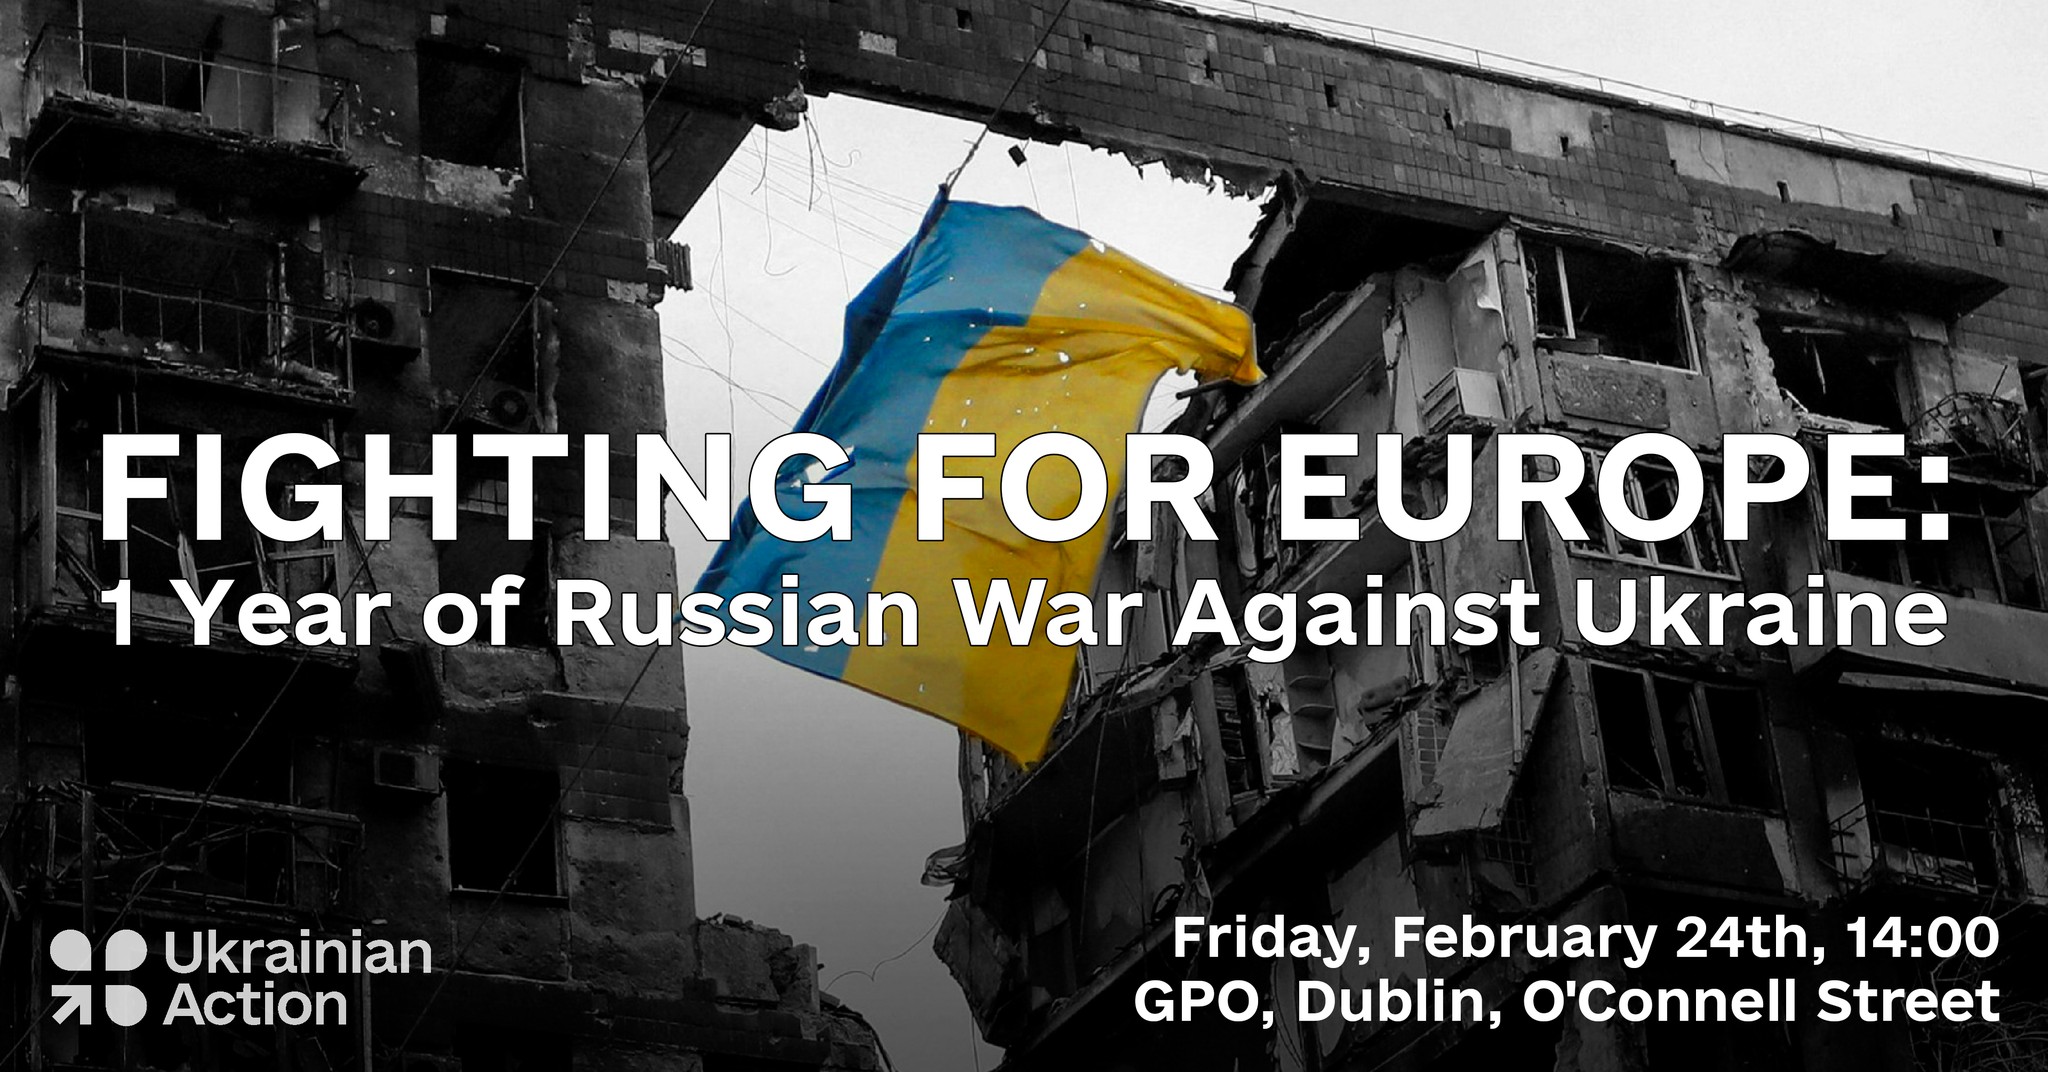 Fighting for Europe: 1 Year of Russian War Against Ukrain